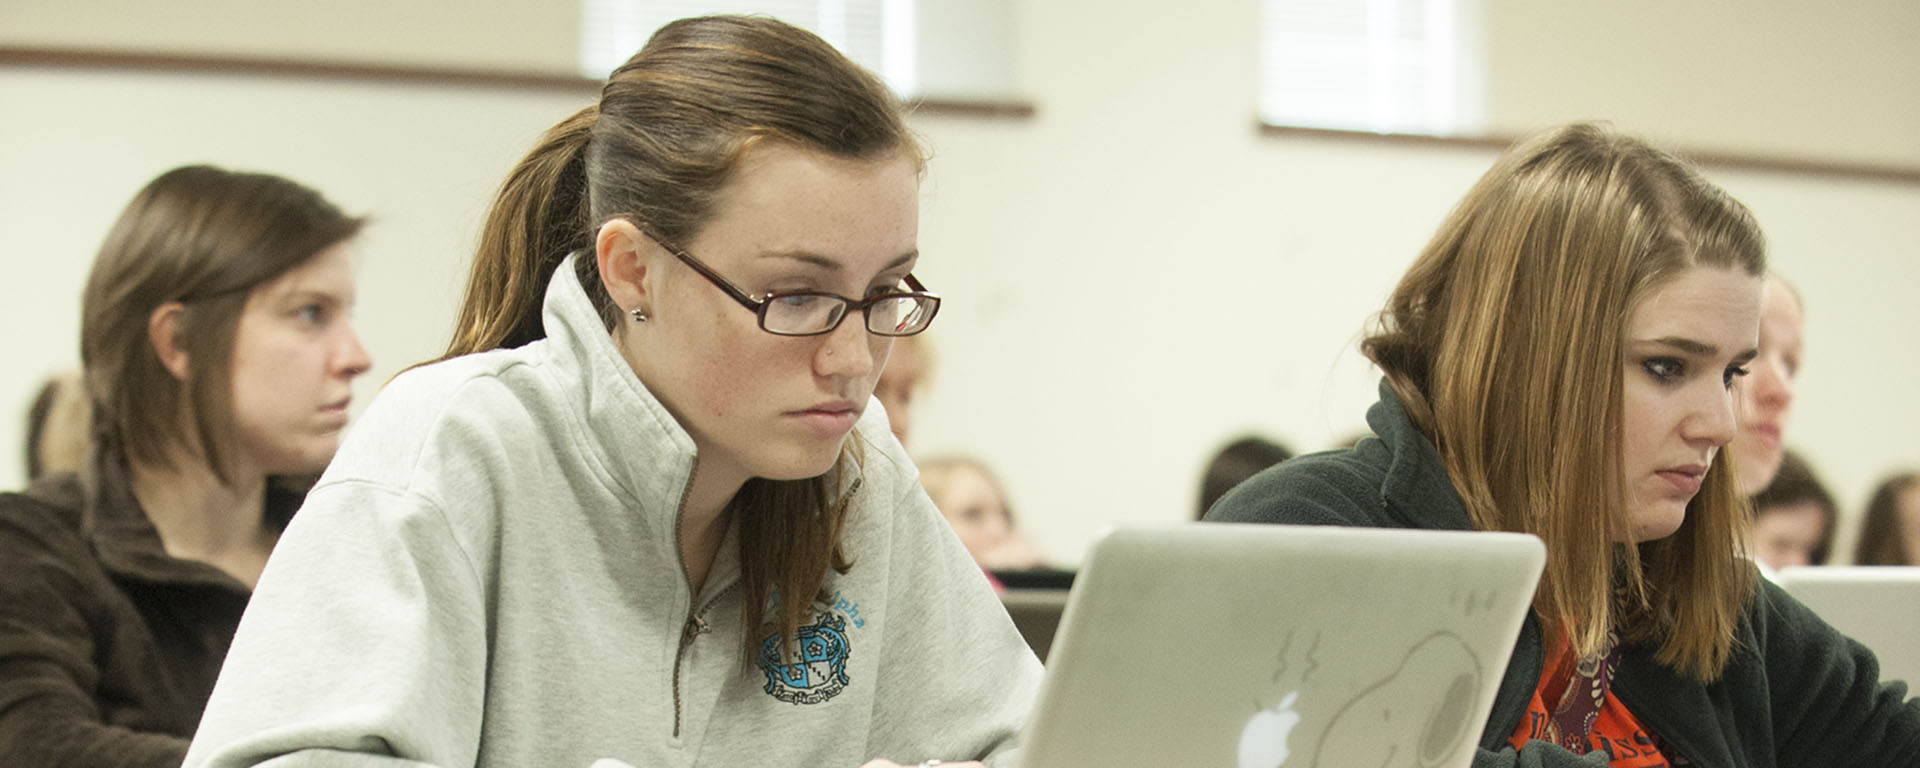 A Washburn student types on her laptop to take notes during class